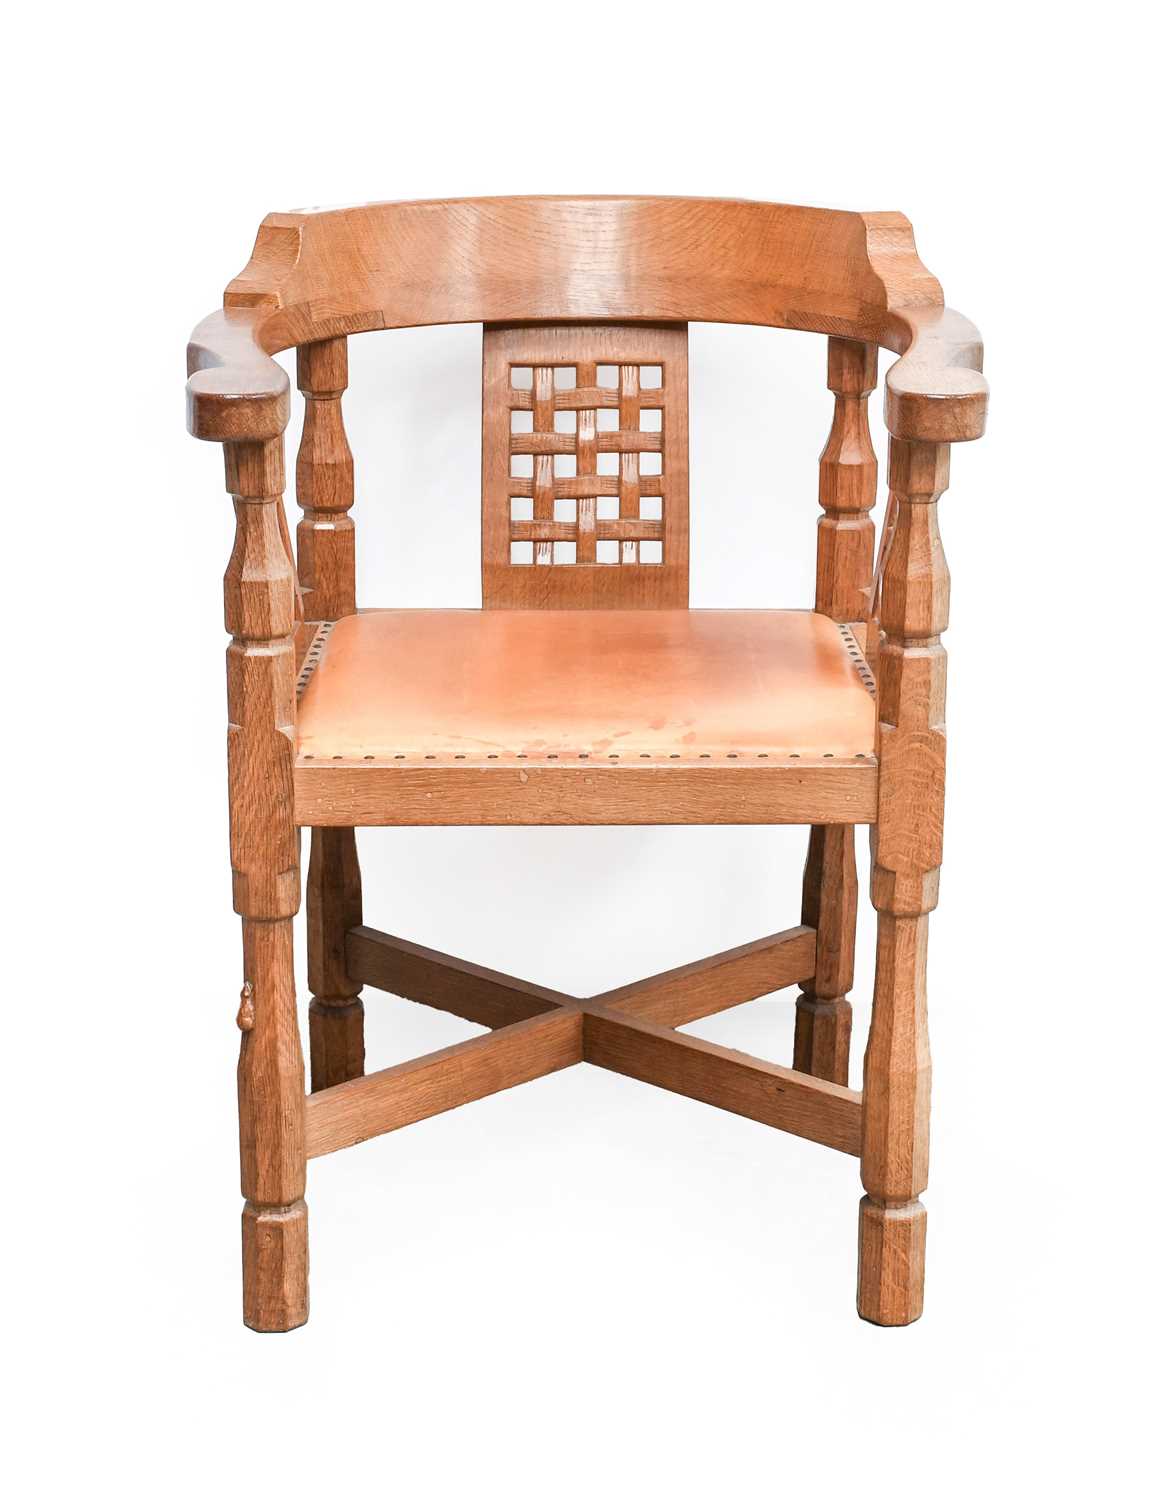 Workshop of Robert Mouseman Thompson (Kilburn): An English Oak Monk's Chair, with curved back and